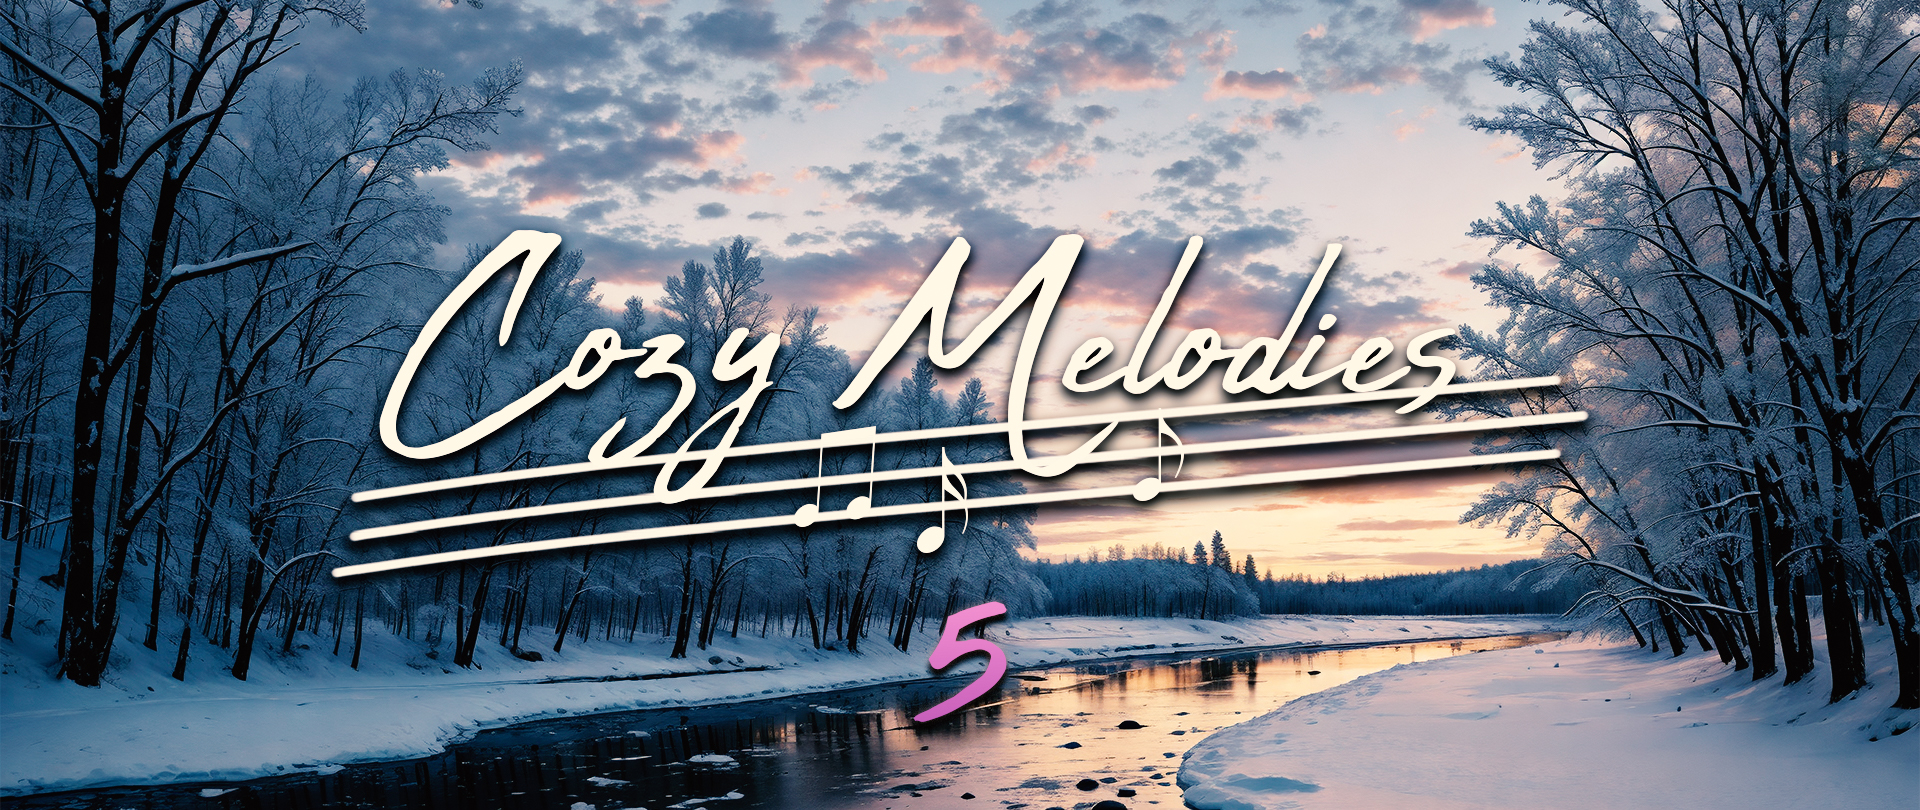 Cosy Melodies Music 5